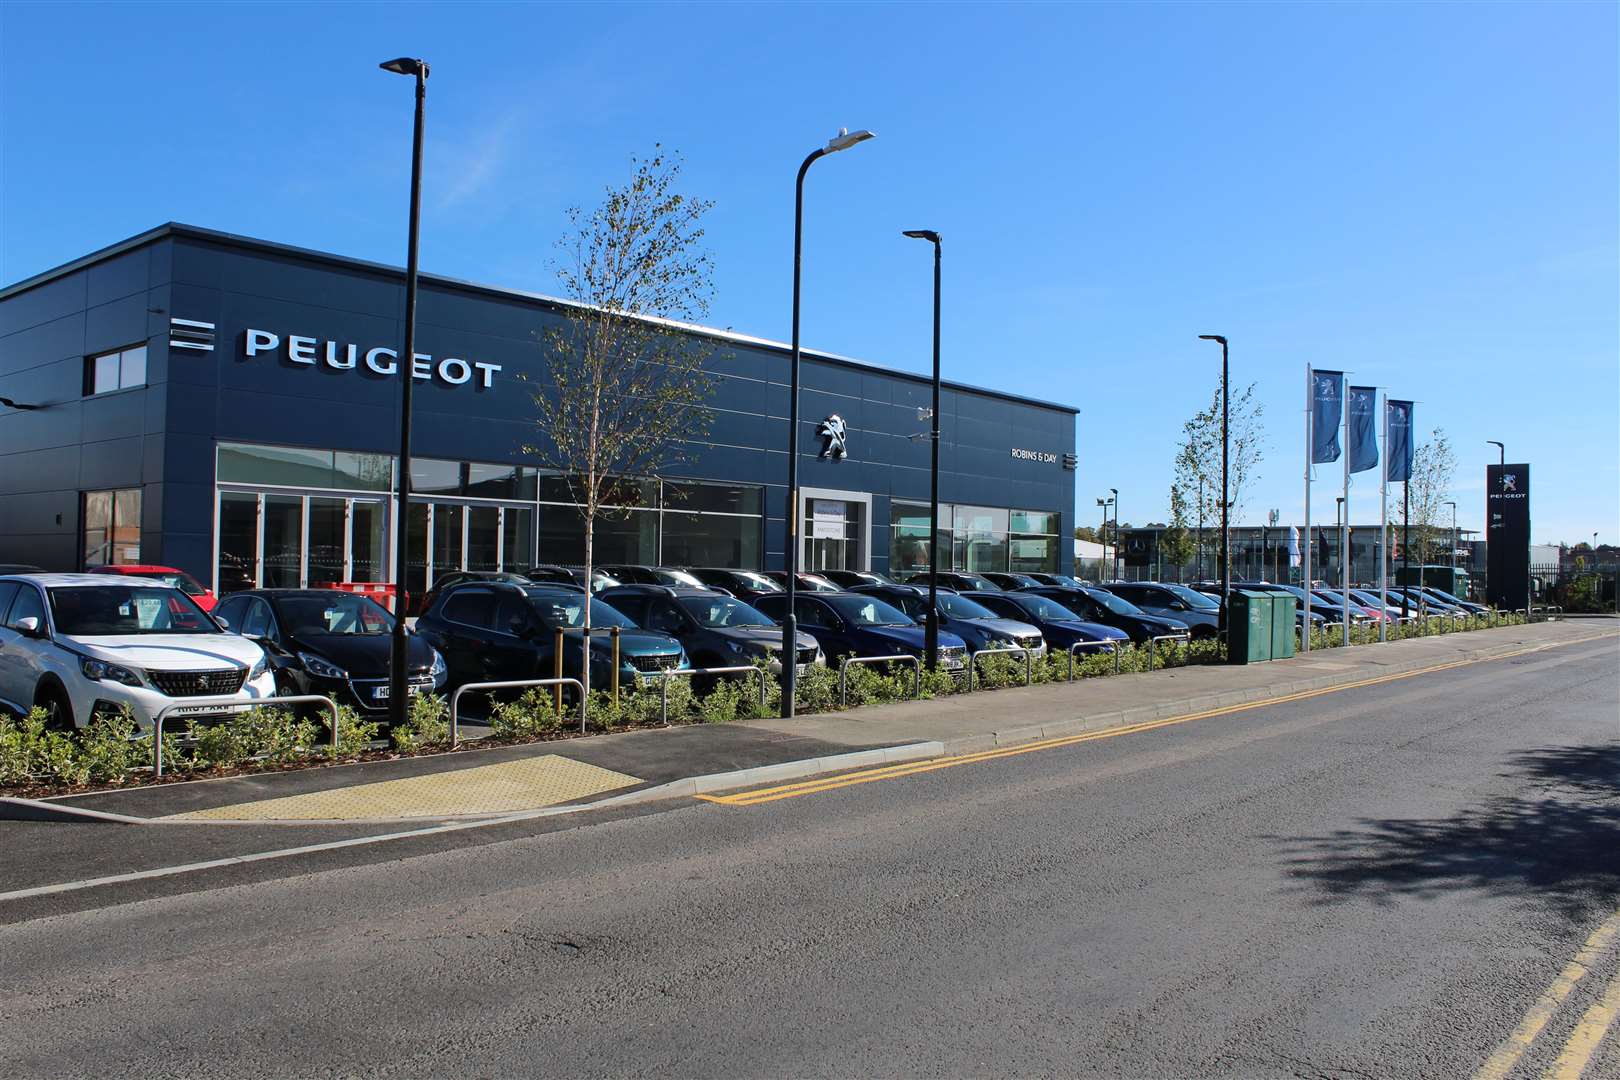 The new Peugeot garage in Park Wood (22507885)